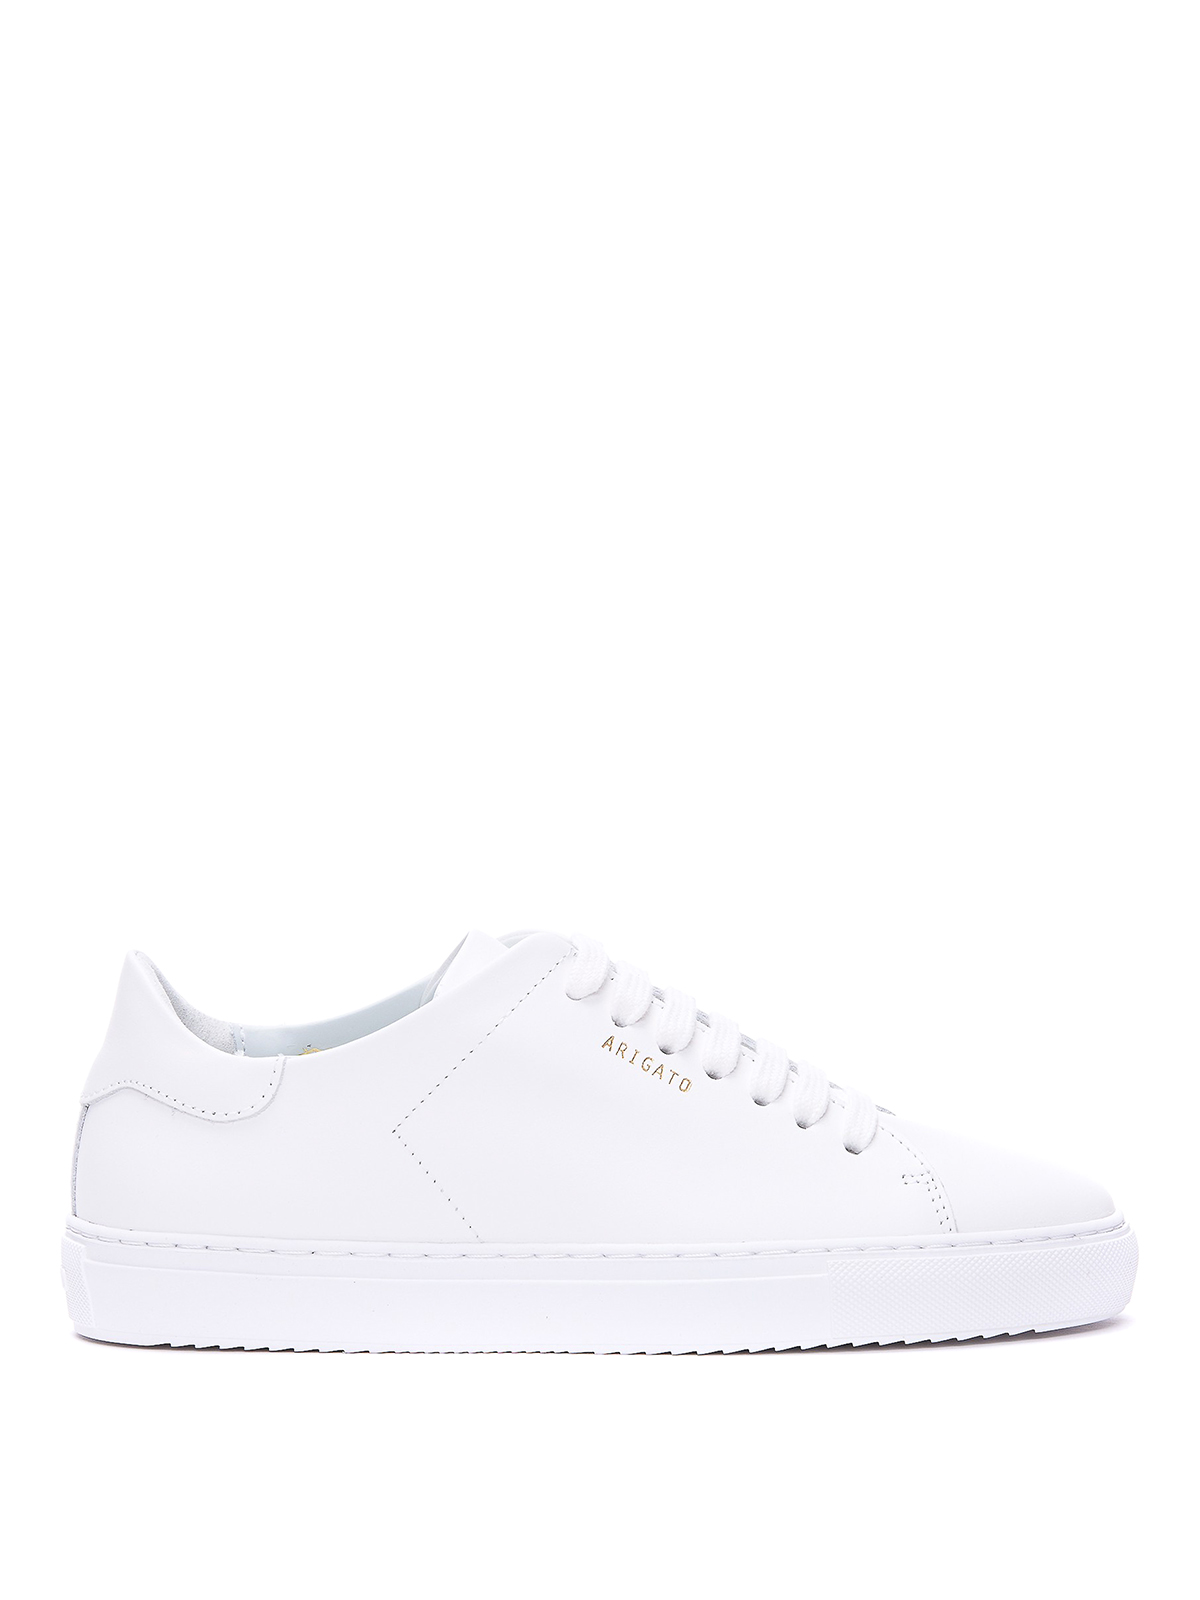 Axel Arigato Clean 90 Leather Sneaker In White